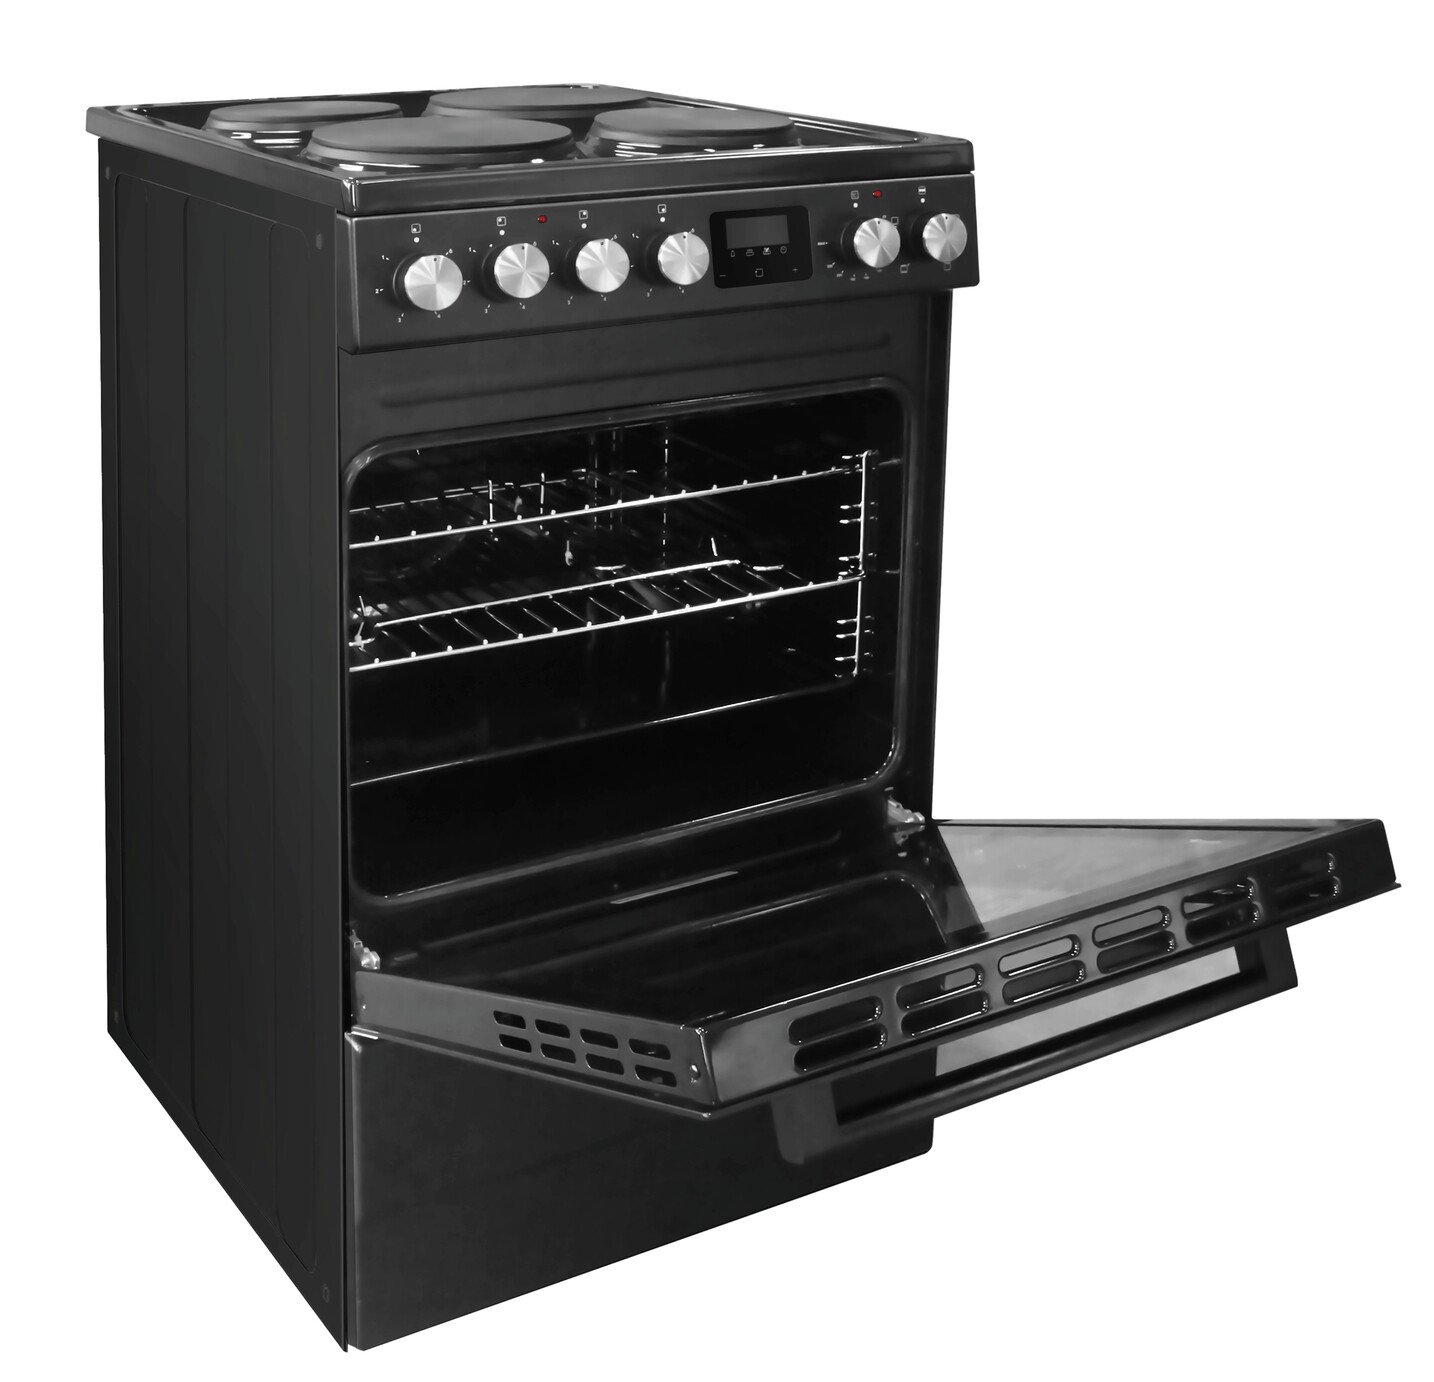 New World NWLS50SEB 50cm Single Oven Electric Cooker Review